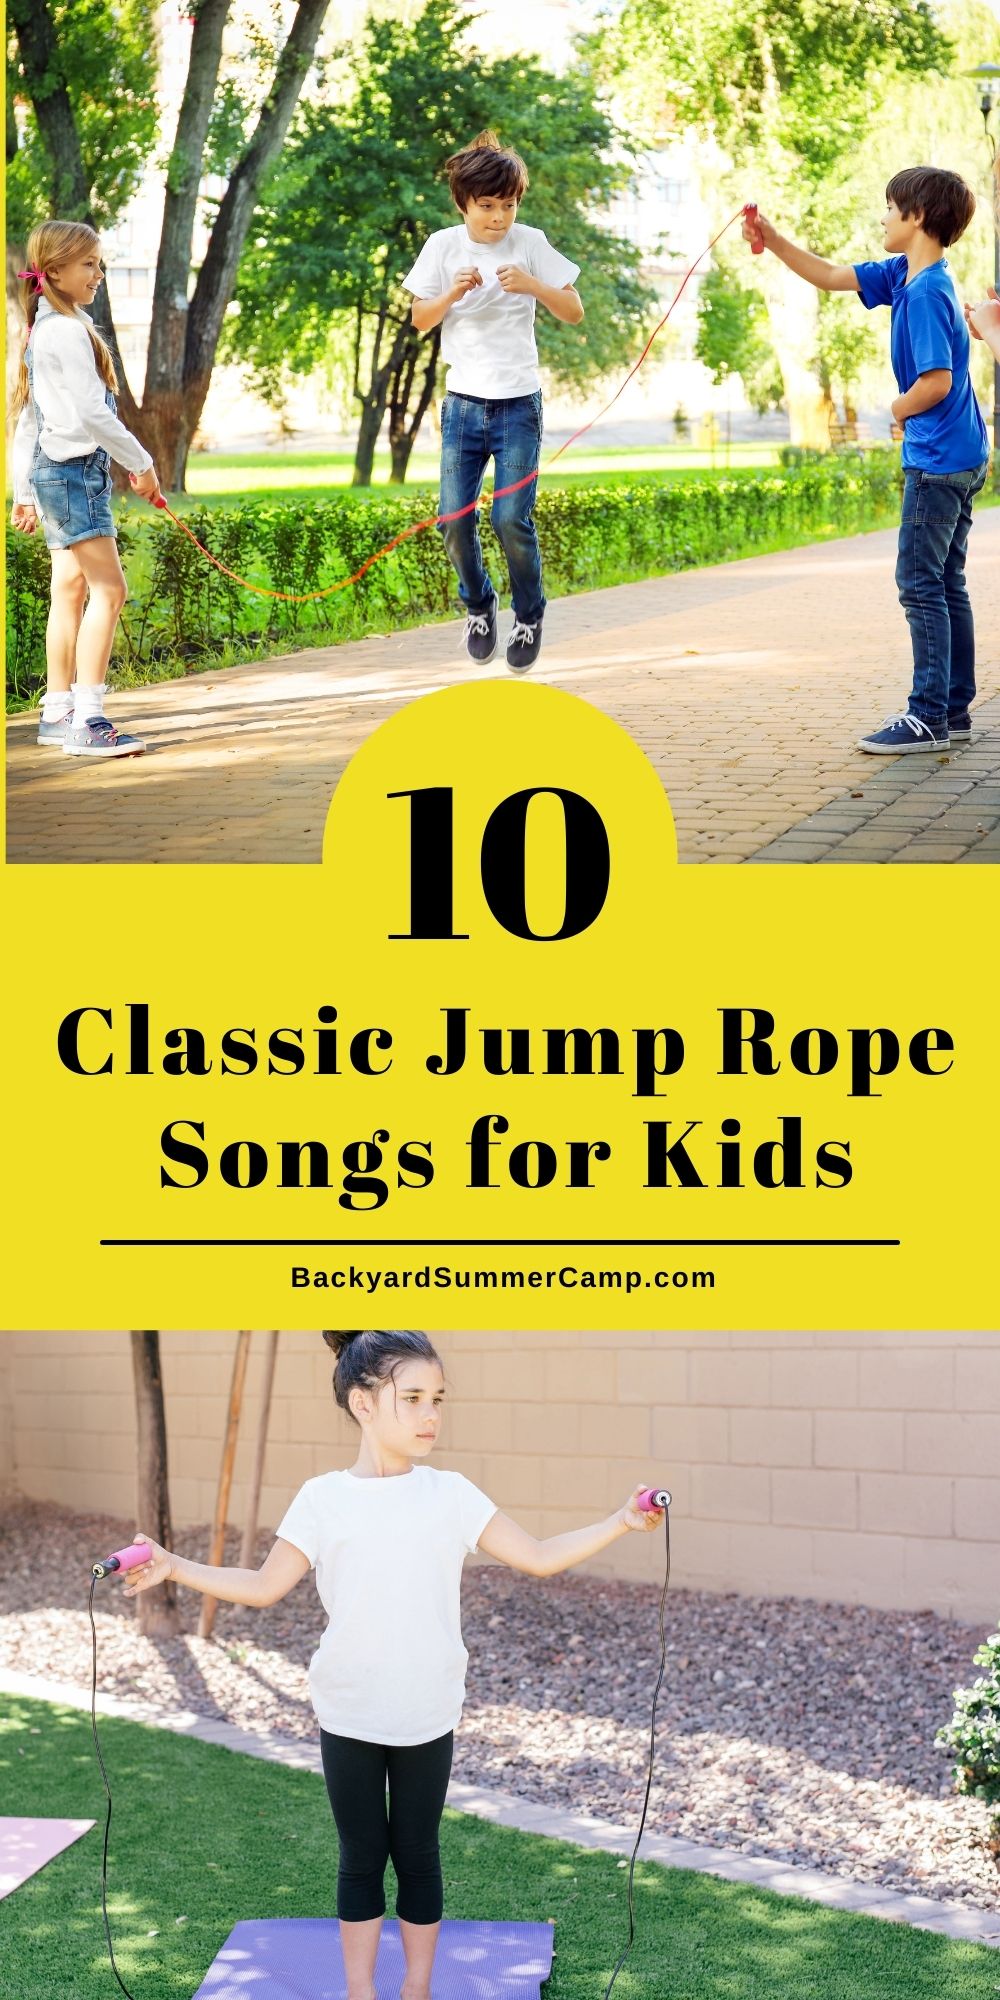 A group of 3 kids jumping rope together and another kid jumping alone with text overlay that reads "10 classic jump rope songs for kids."